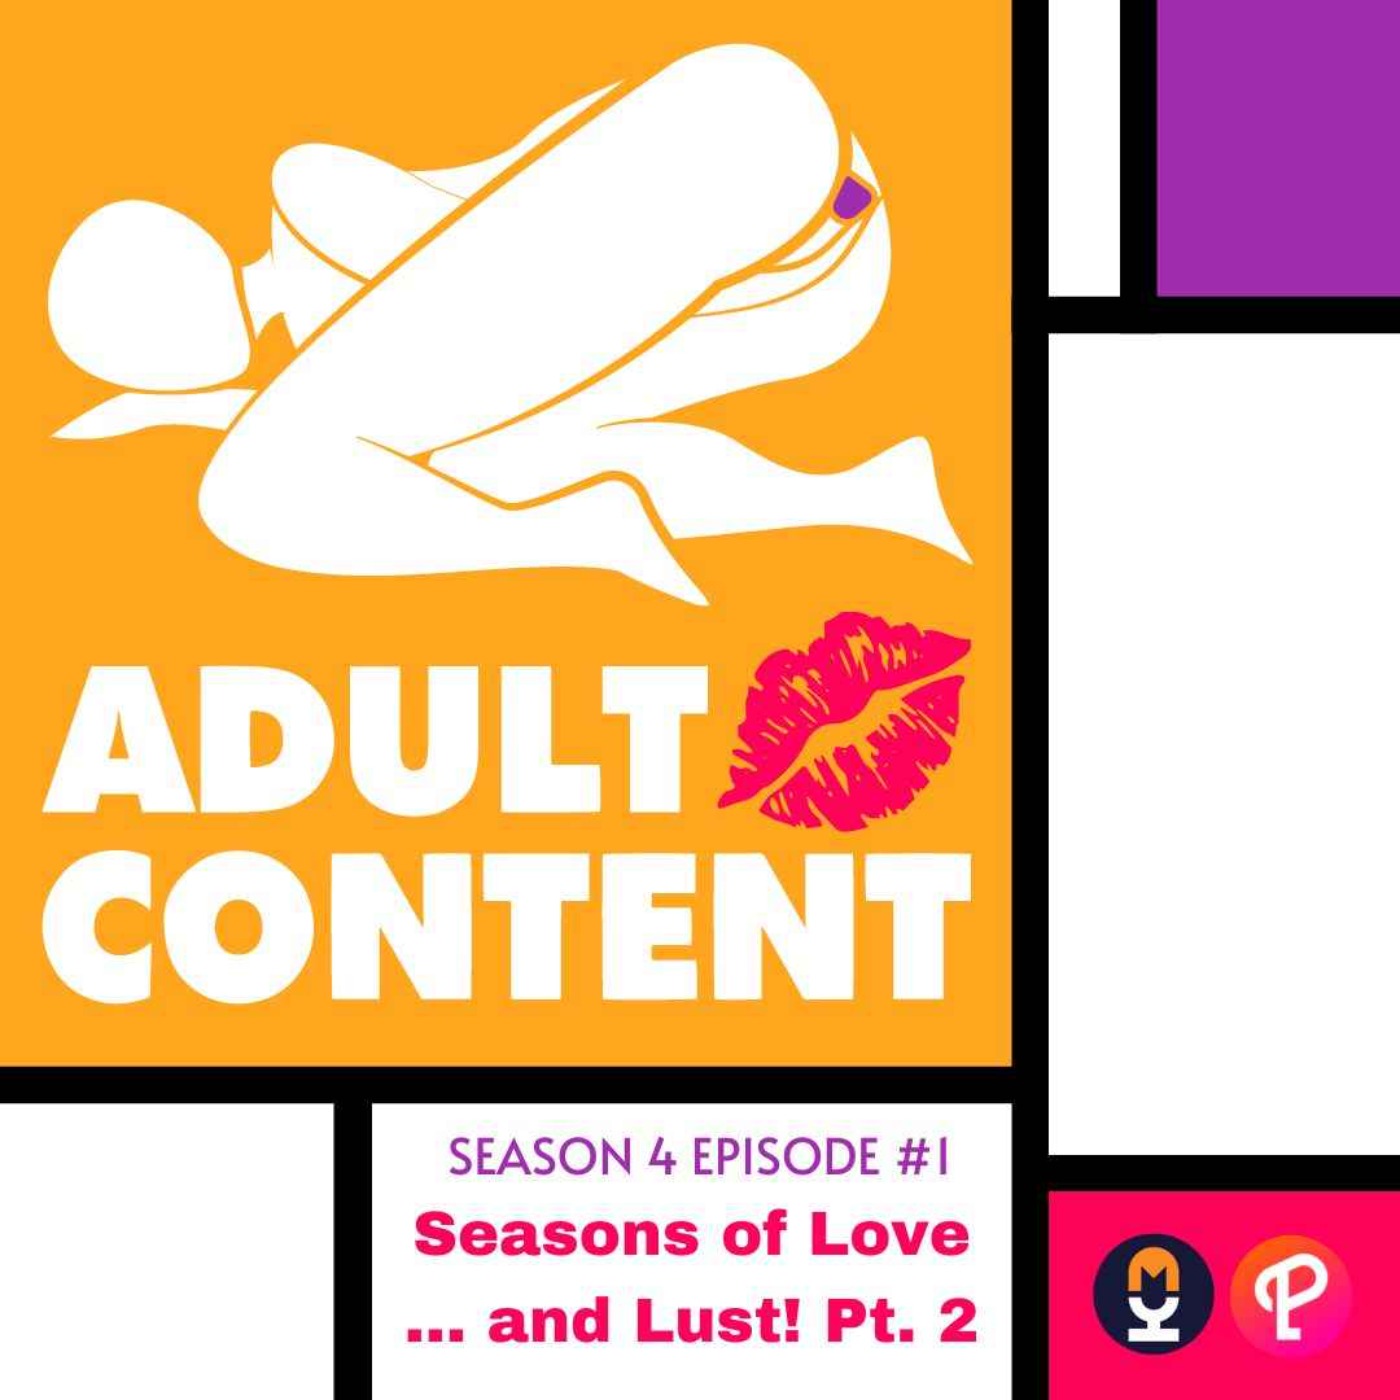 S4E1: Seasons of Love … and Lust! Pt. 2